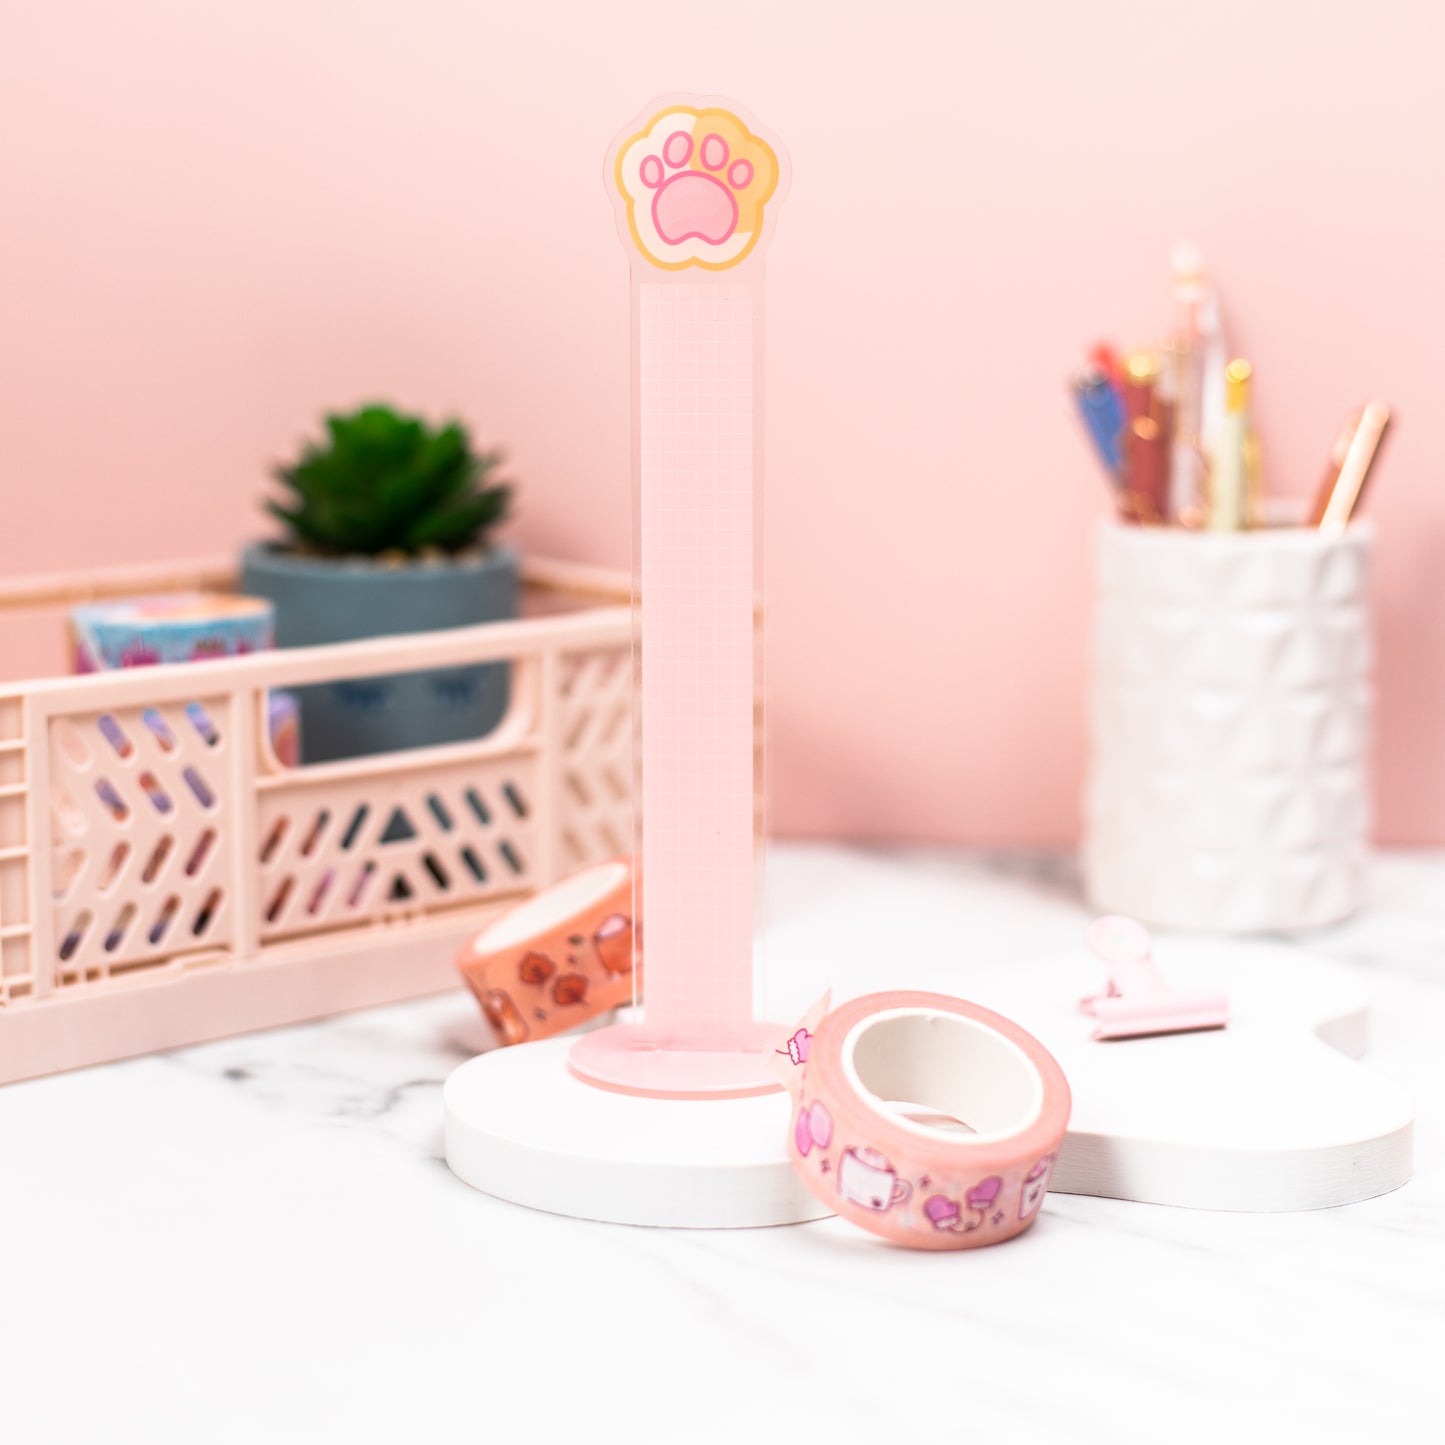 Adorable Cat Paw Washi Tape Stand, a must-have accessory for organizing and displaying your washi tape collection."